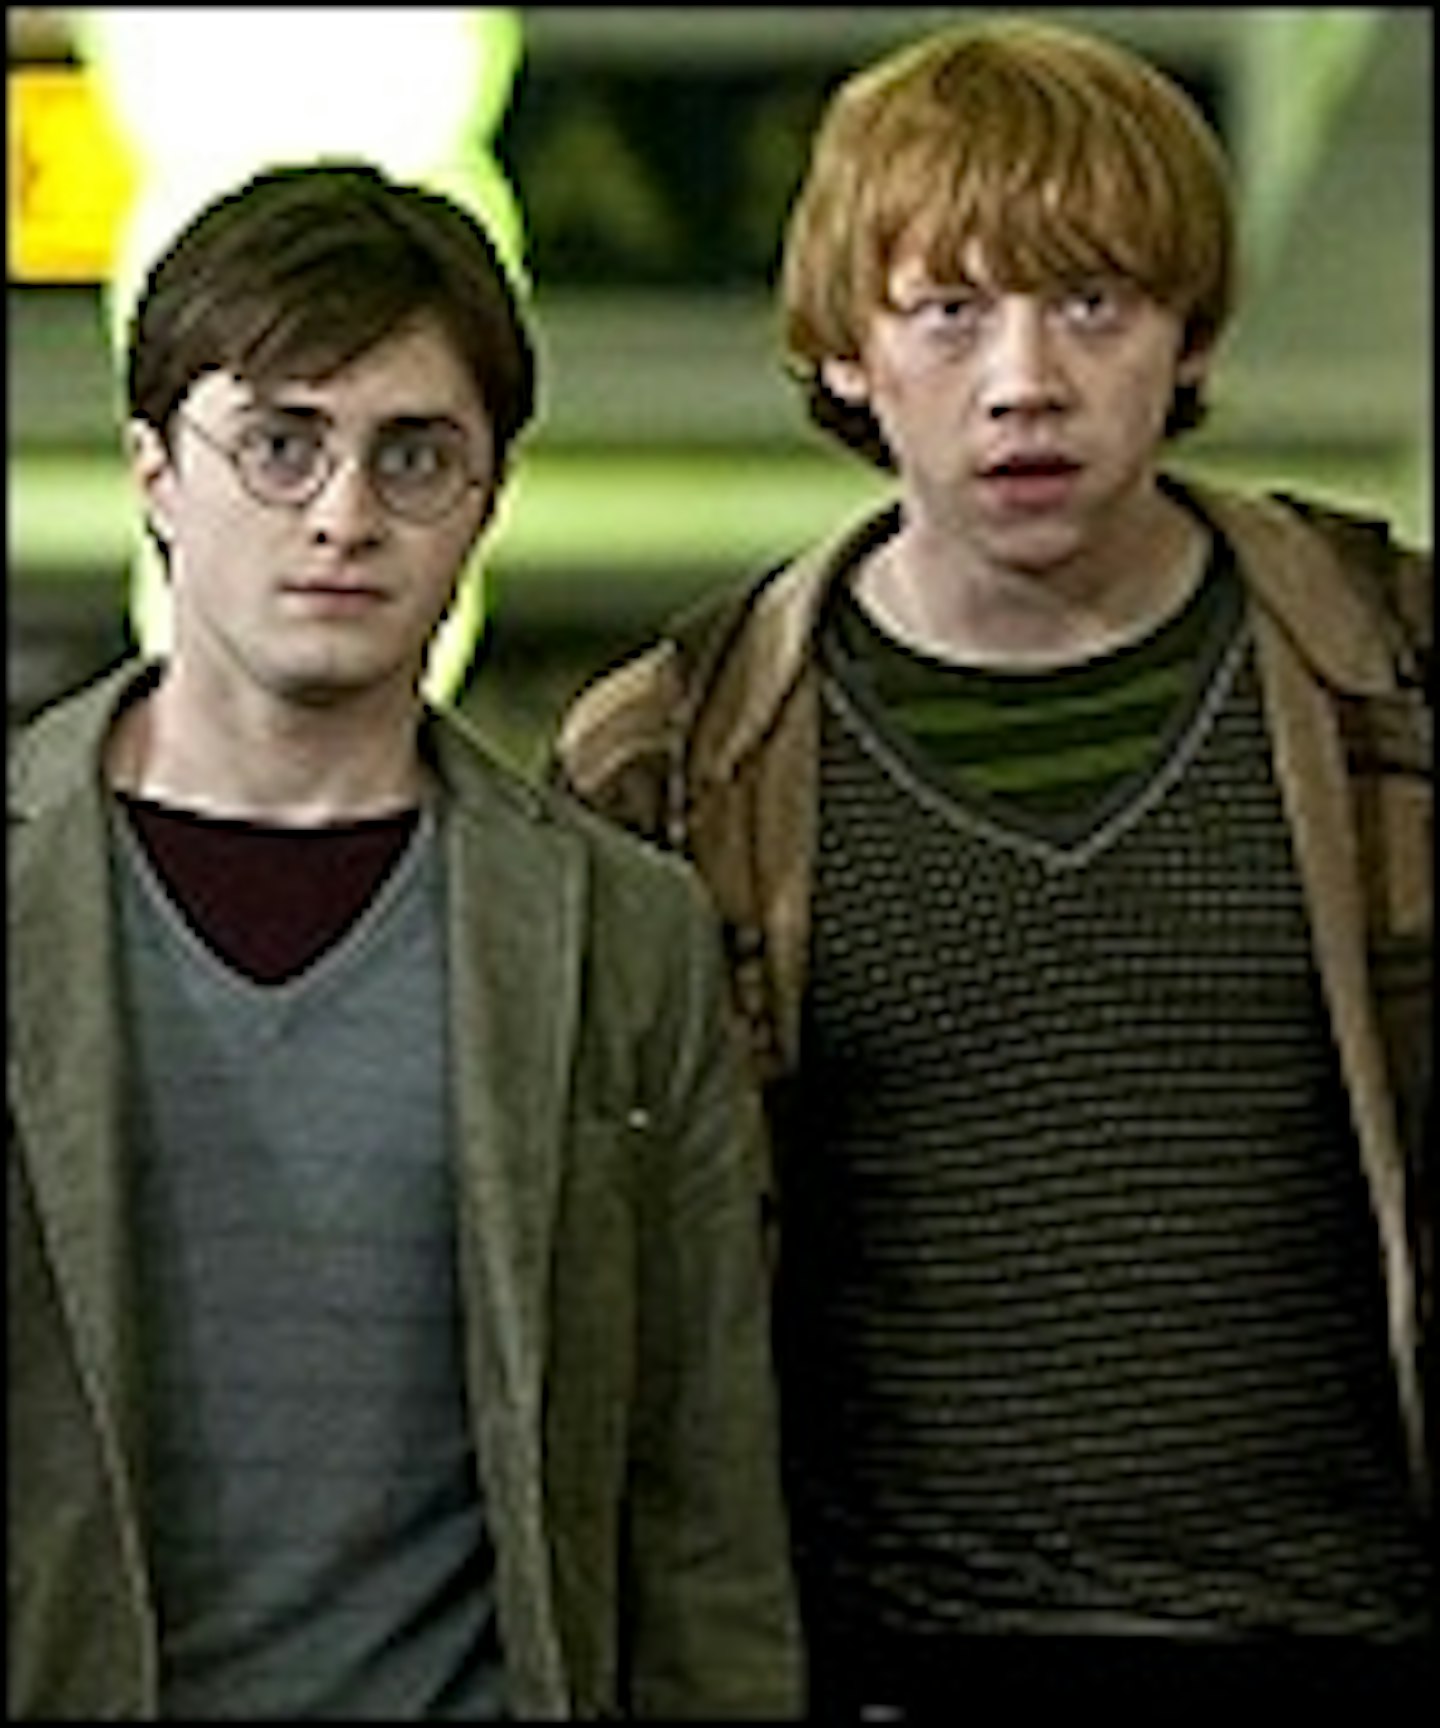 Epic Deathly Hallows Trailer Now Online